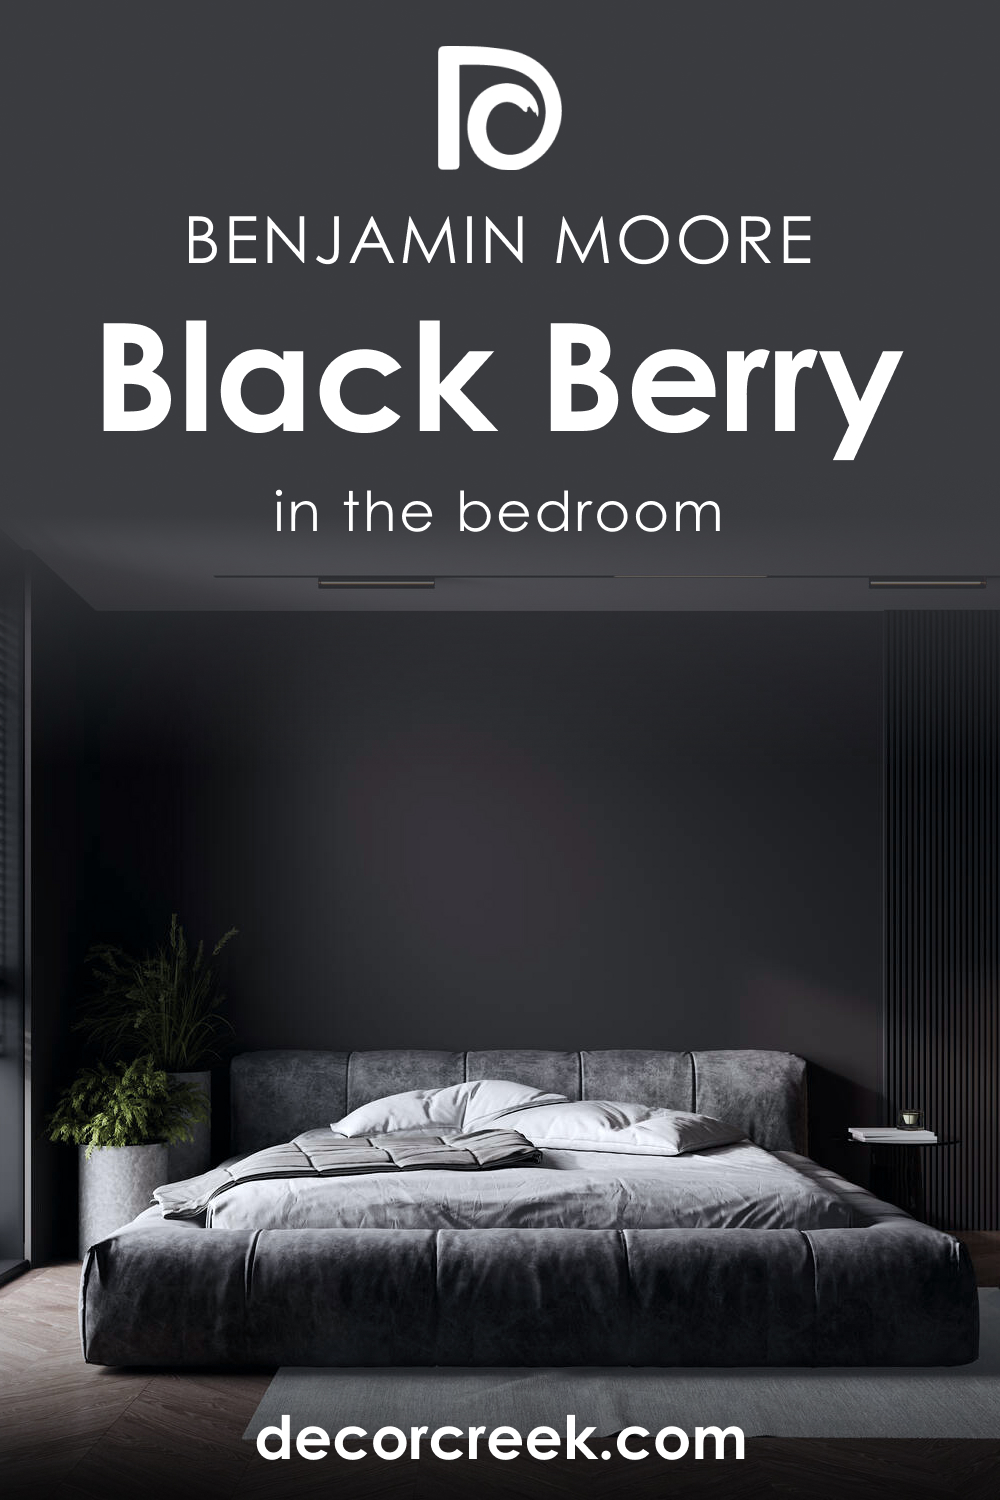 How to Use Black Berry 2119-20 in the Bedroom?